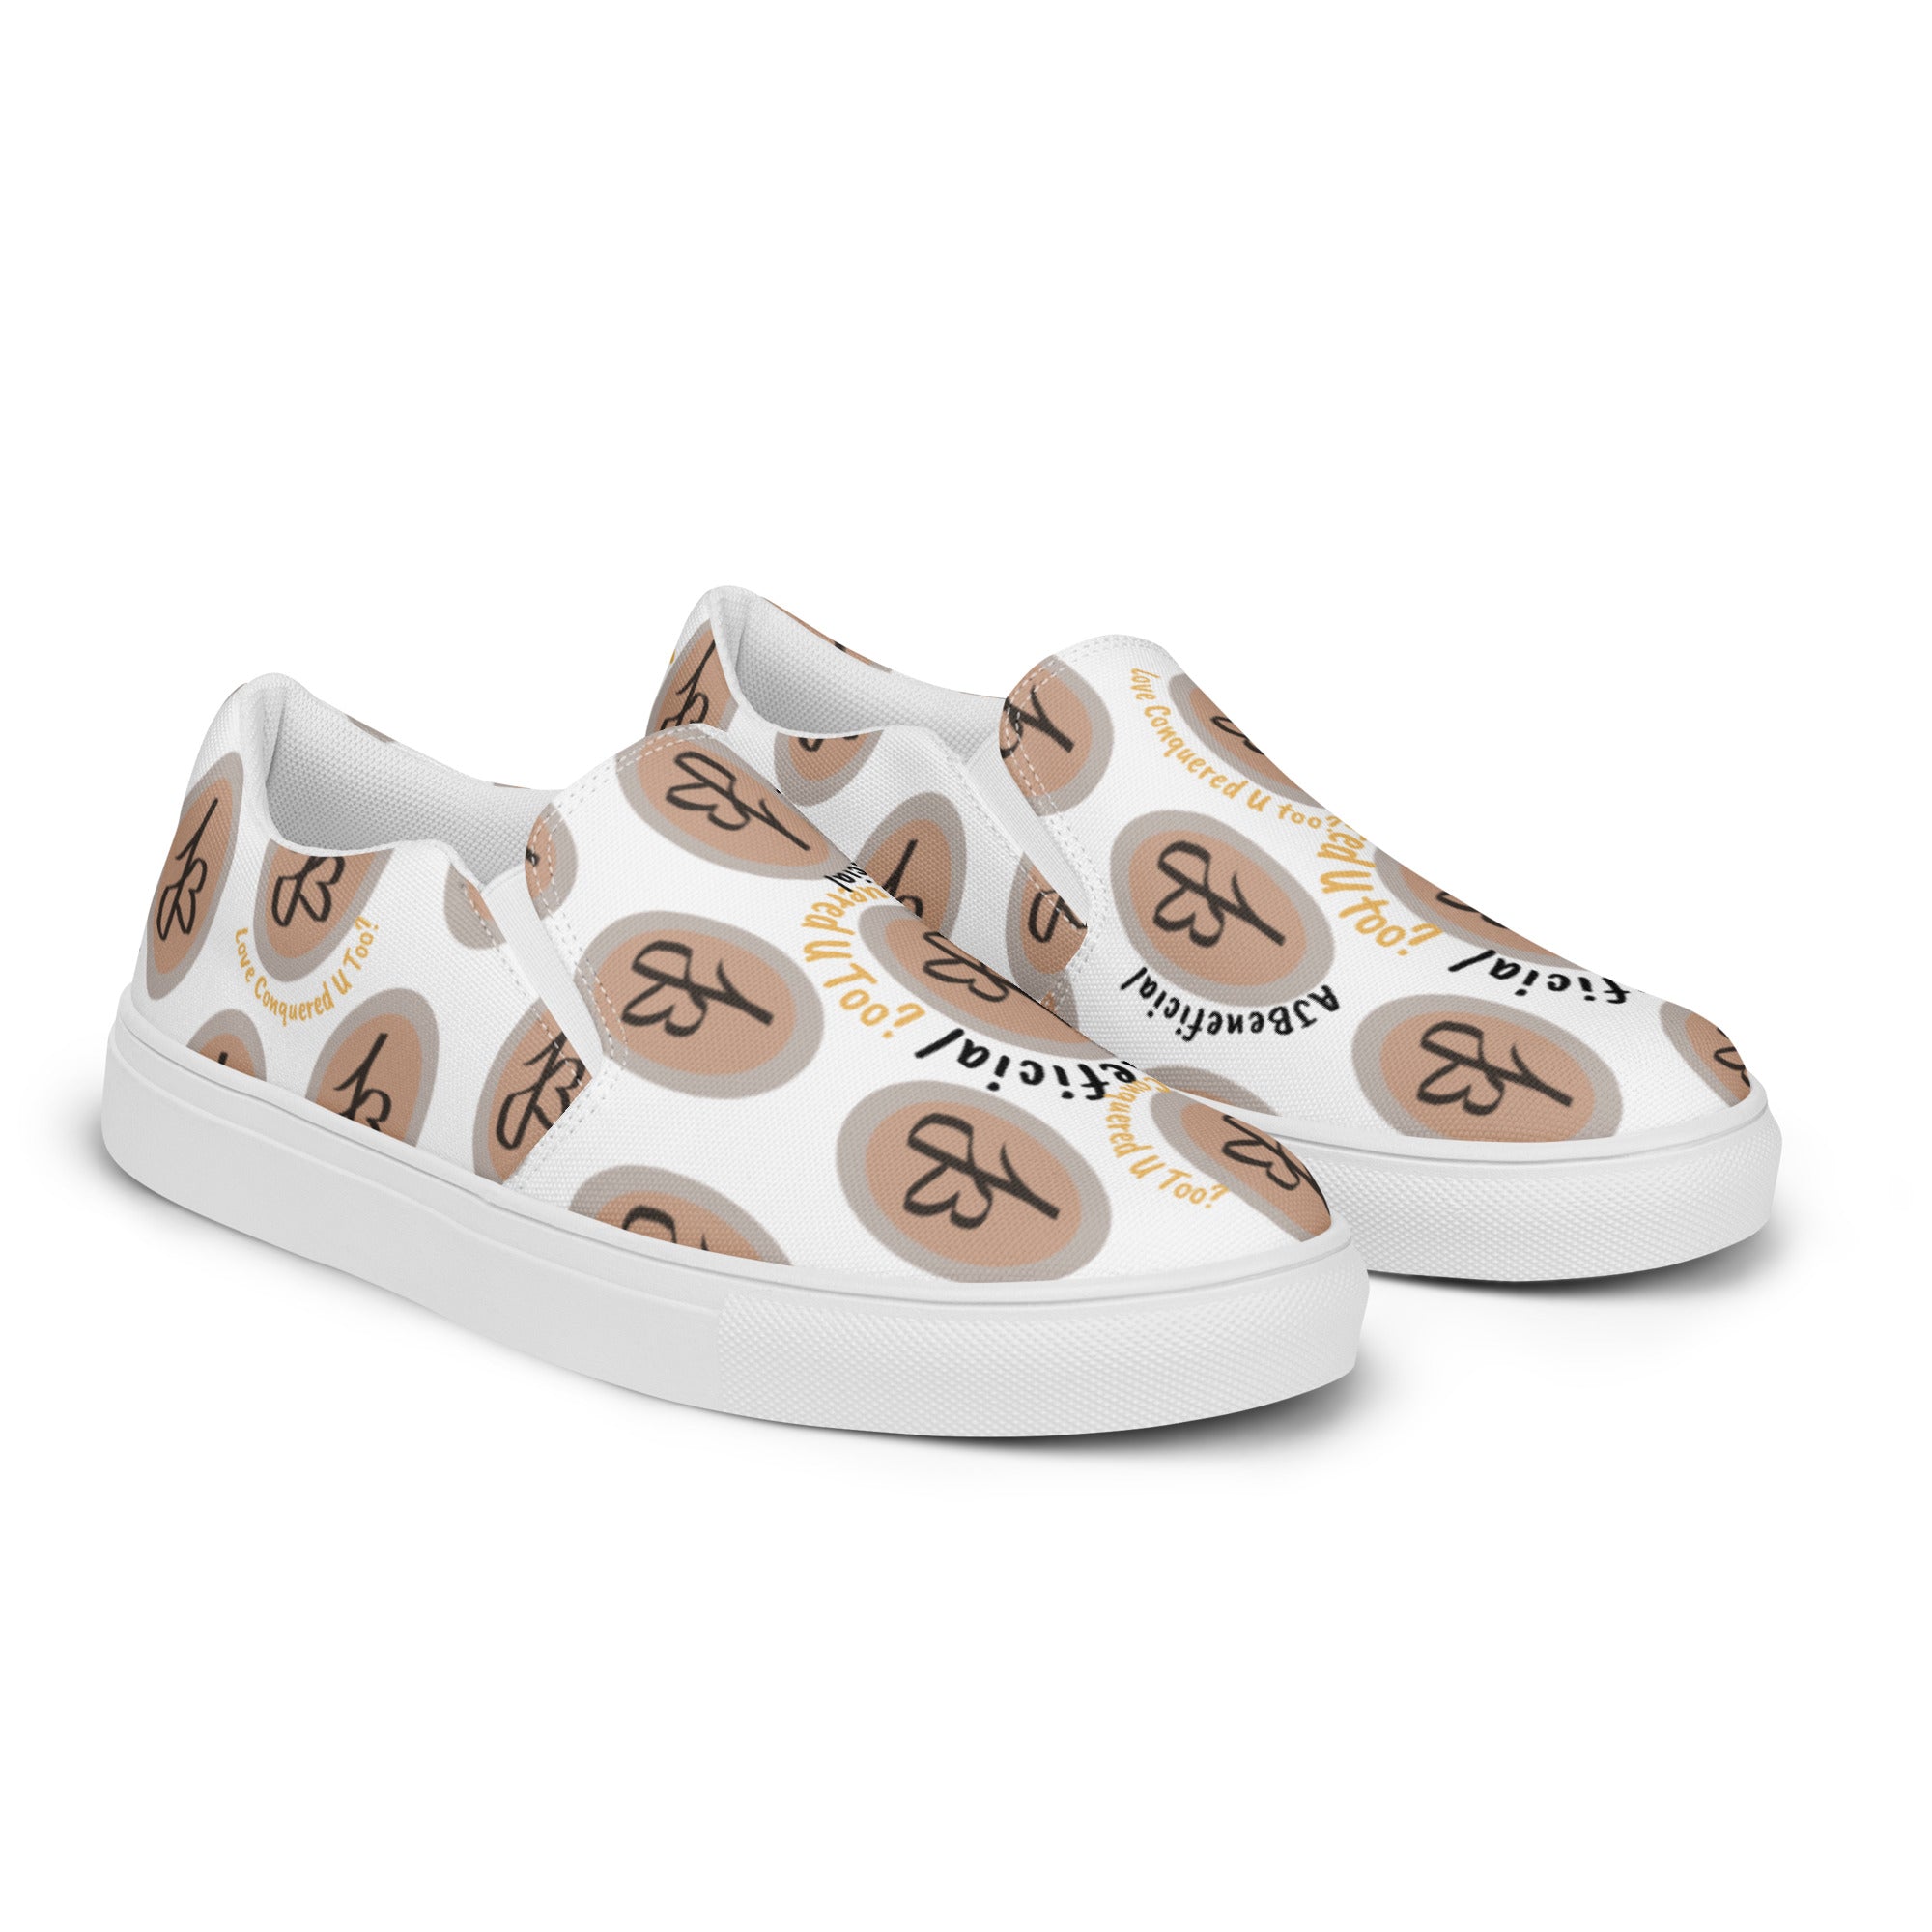 AJBeneficial Conquered Women’s slip-on canvas shoes on White